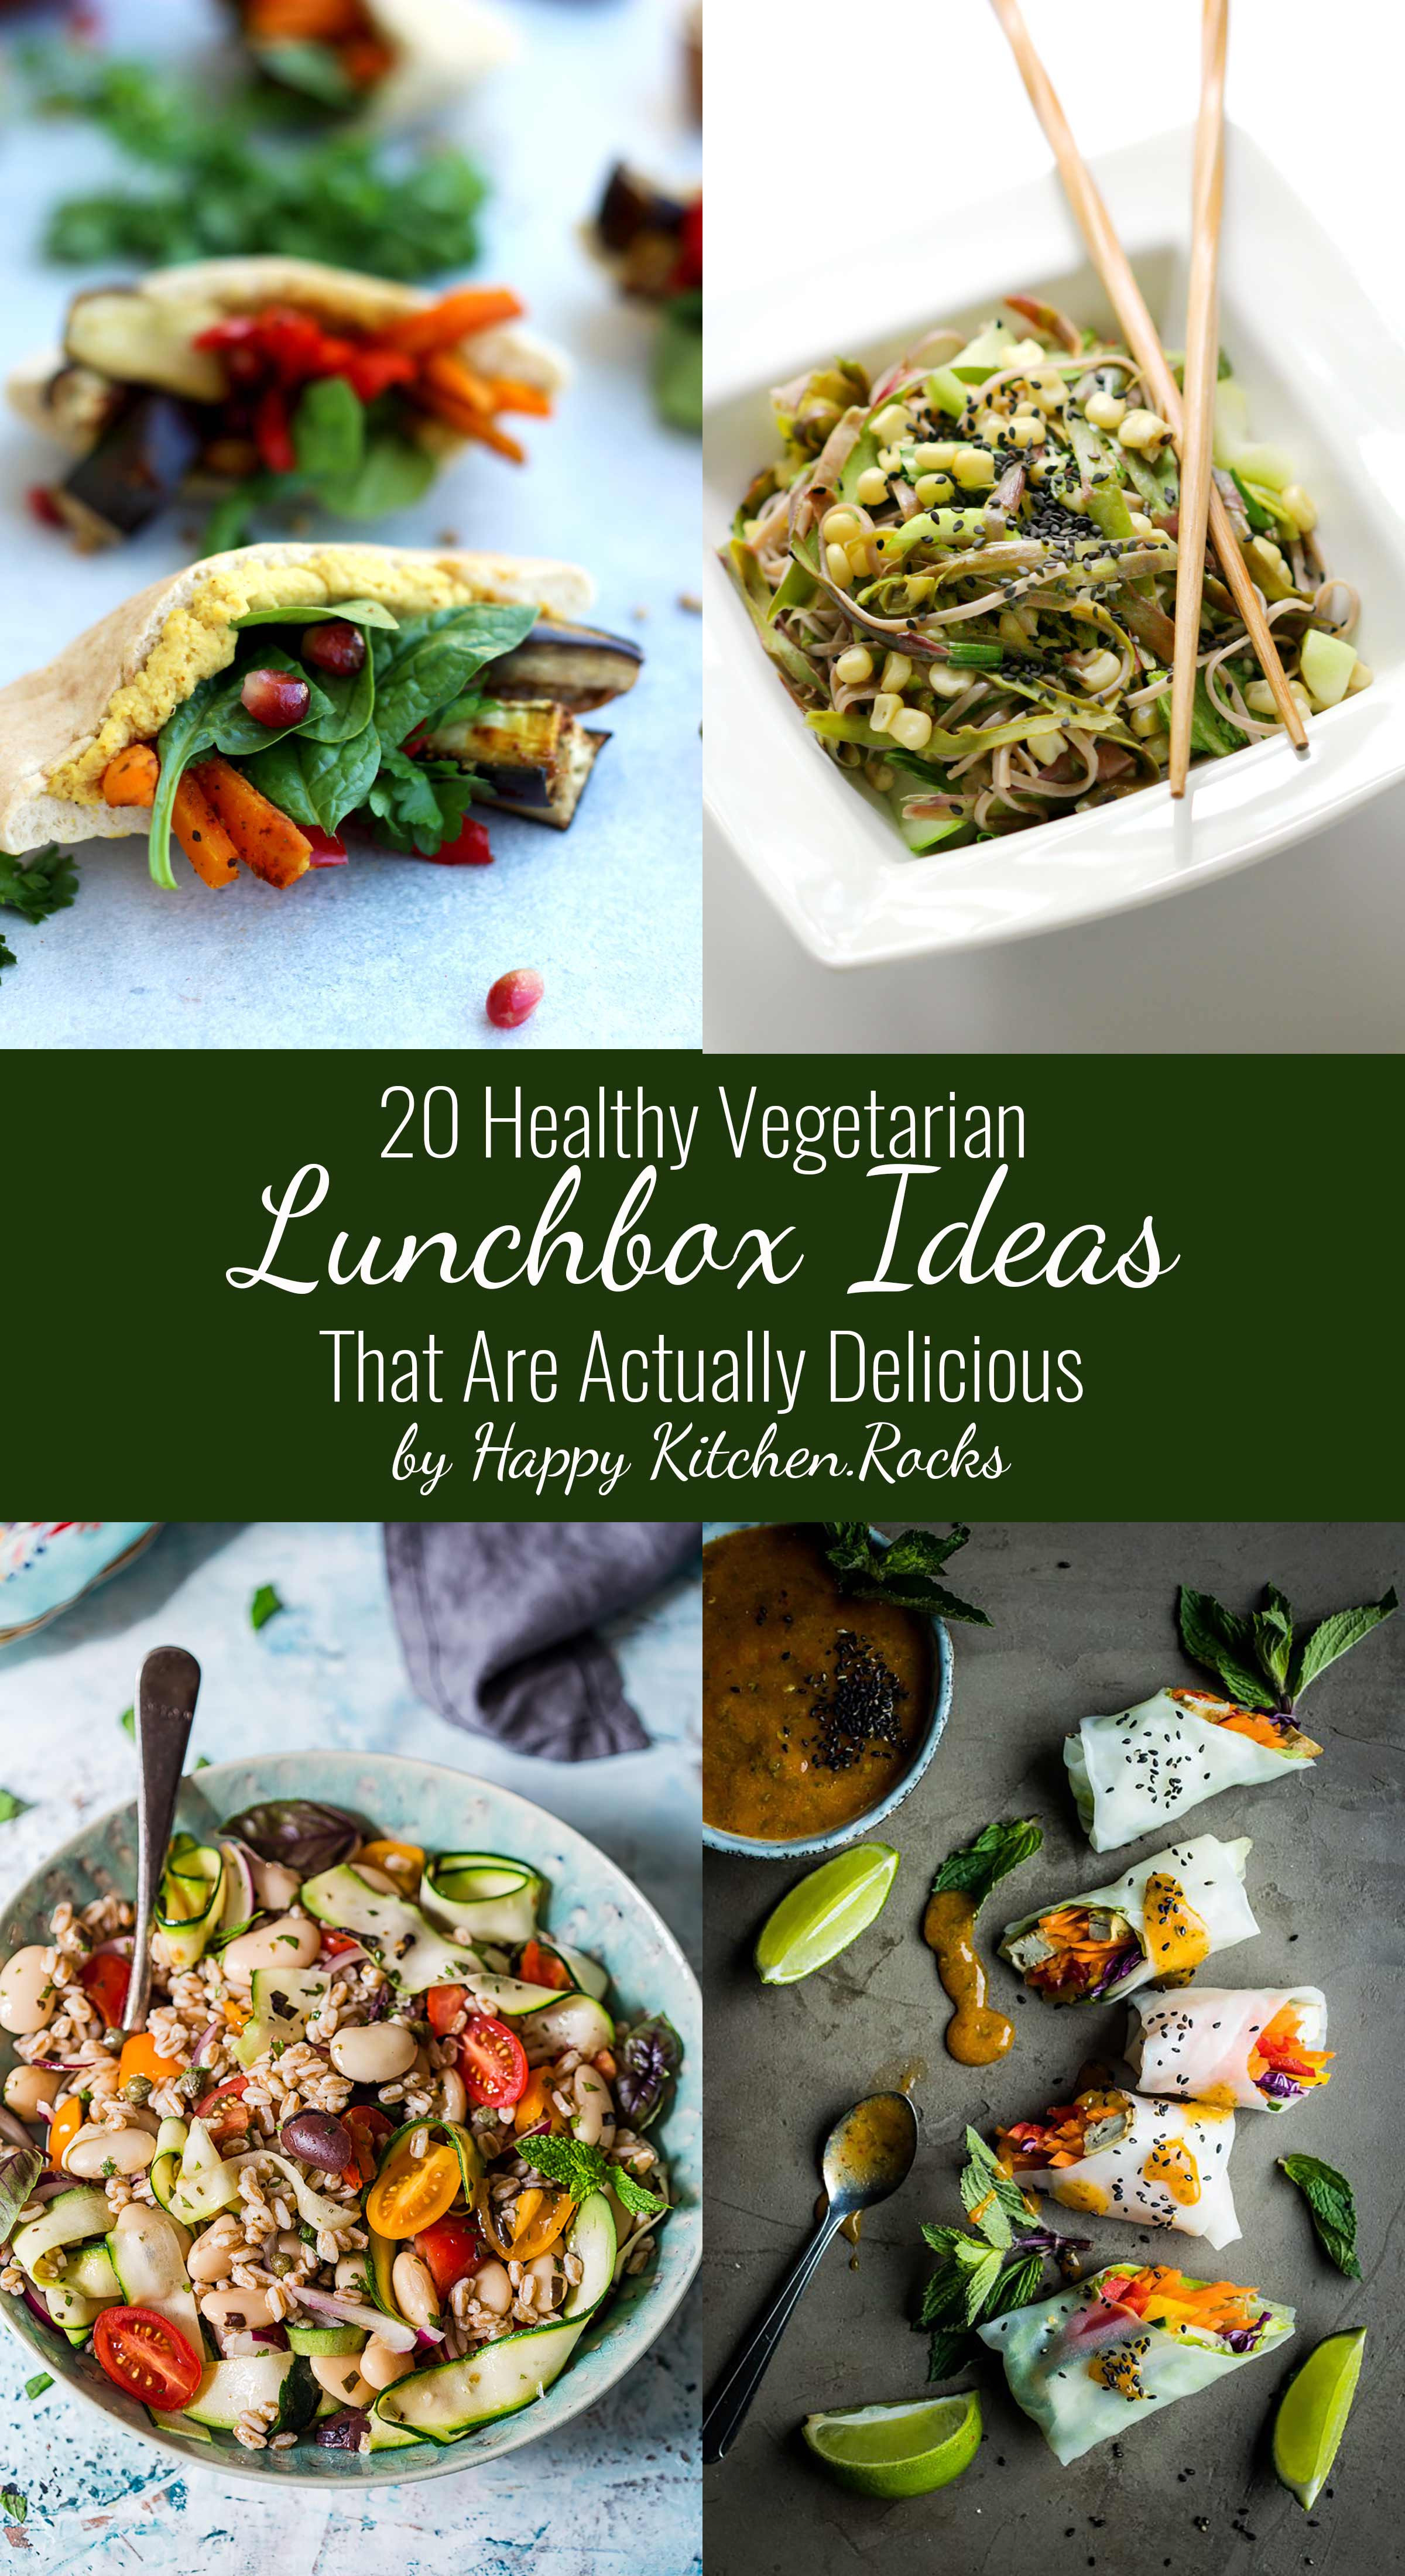 Healthy Vegetarian Lunch Recipes
 20 Healthy Ve arian Lunchbox Ideas That Are Actually